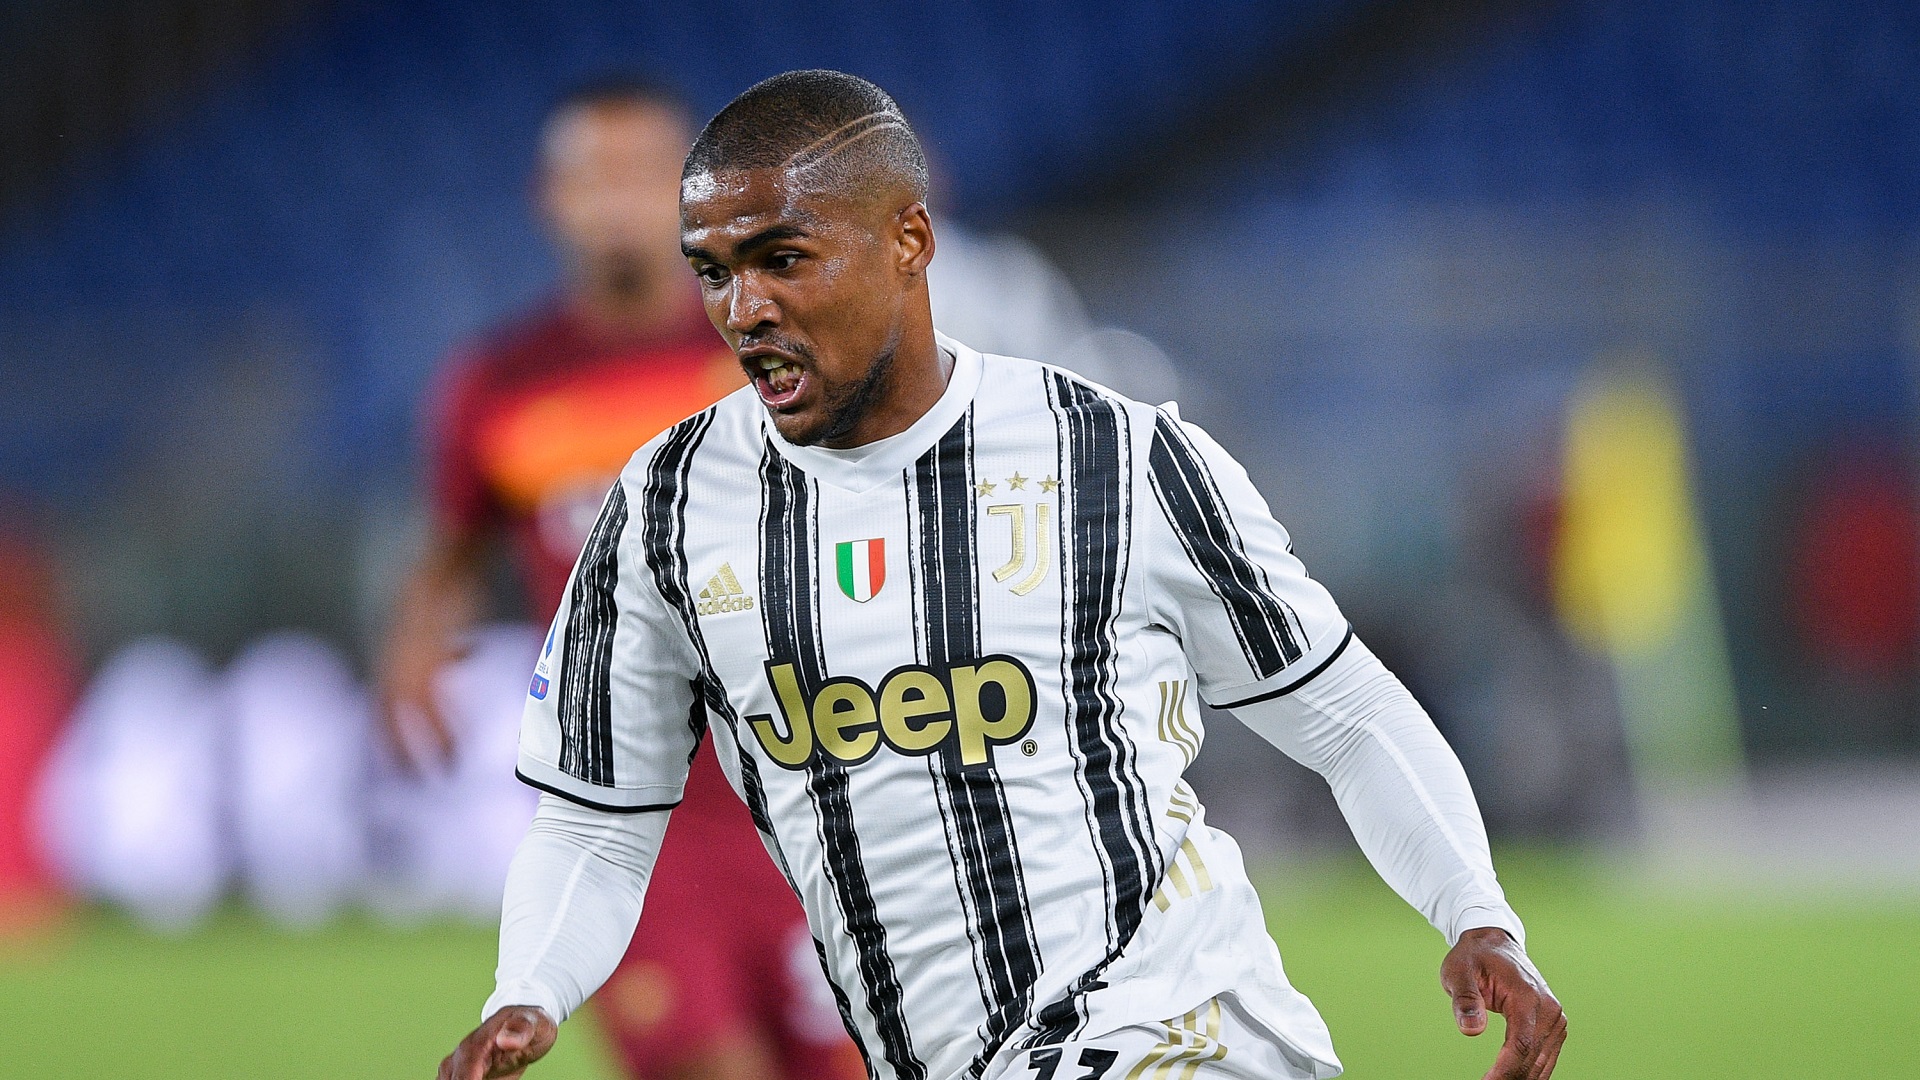 Douglas Costa has terminated his loan spell at Gremio early, but, as expected, he will not be back at Juventus and will join Los Angeles Galaxy.